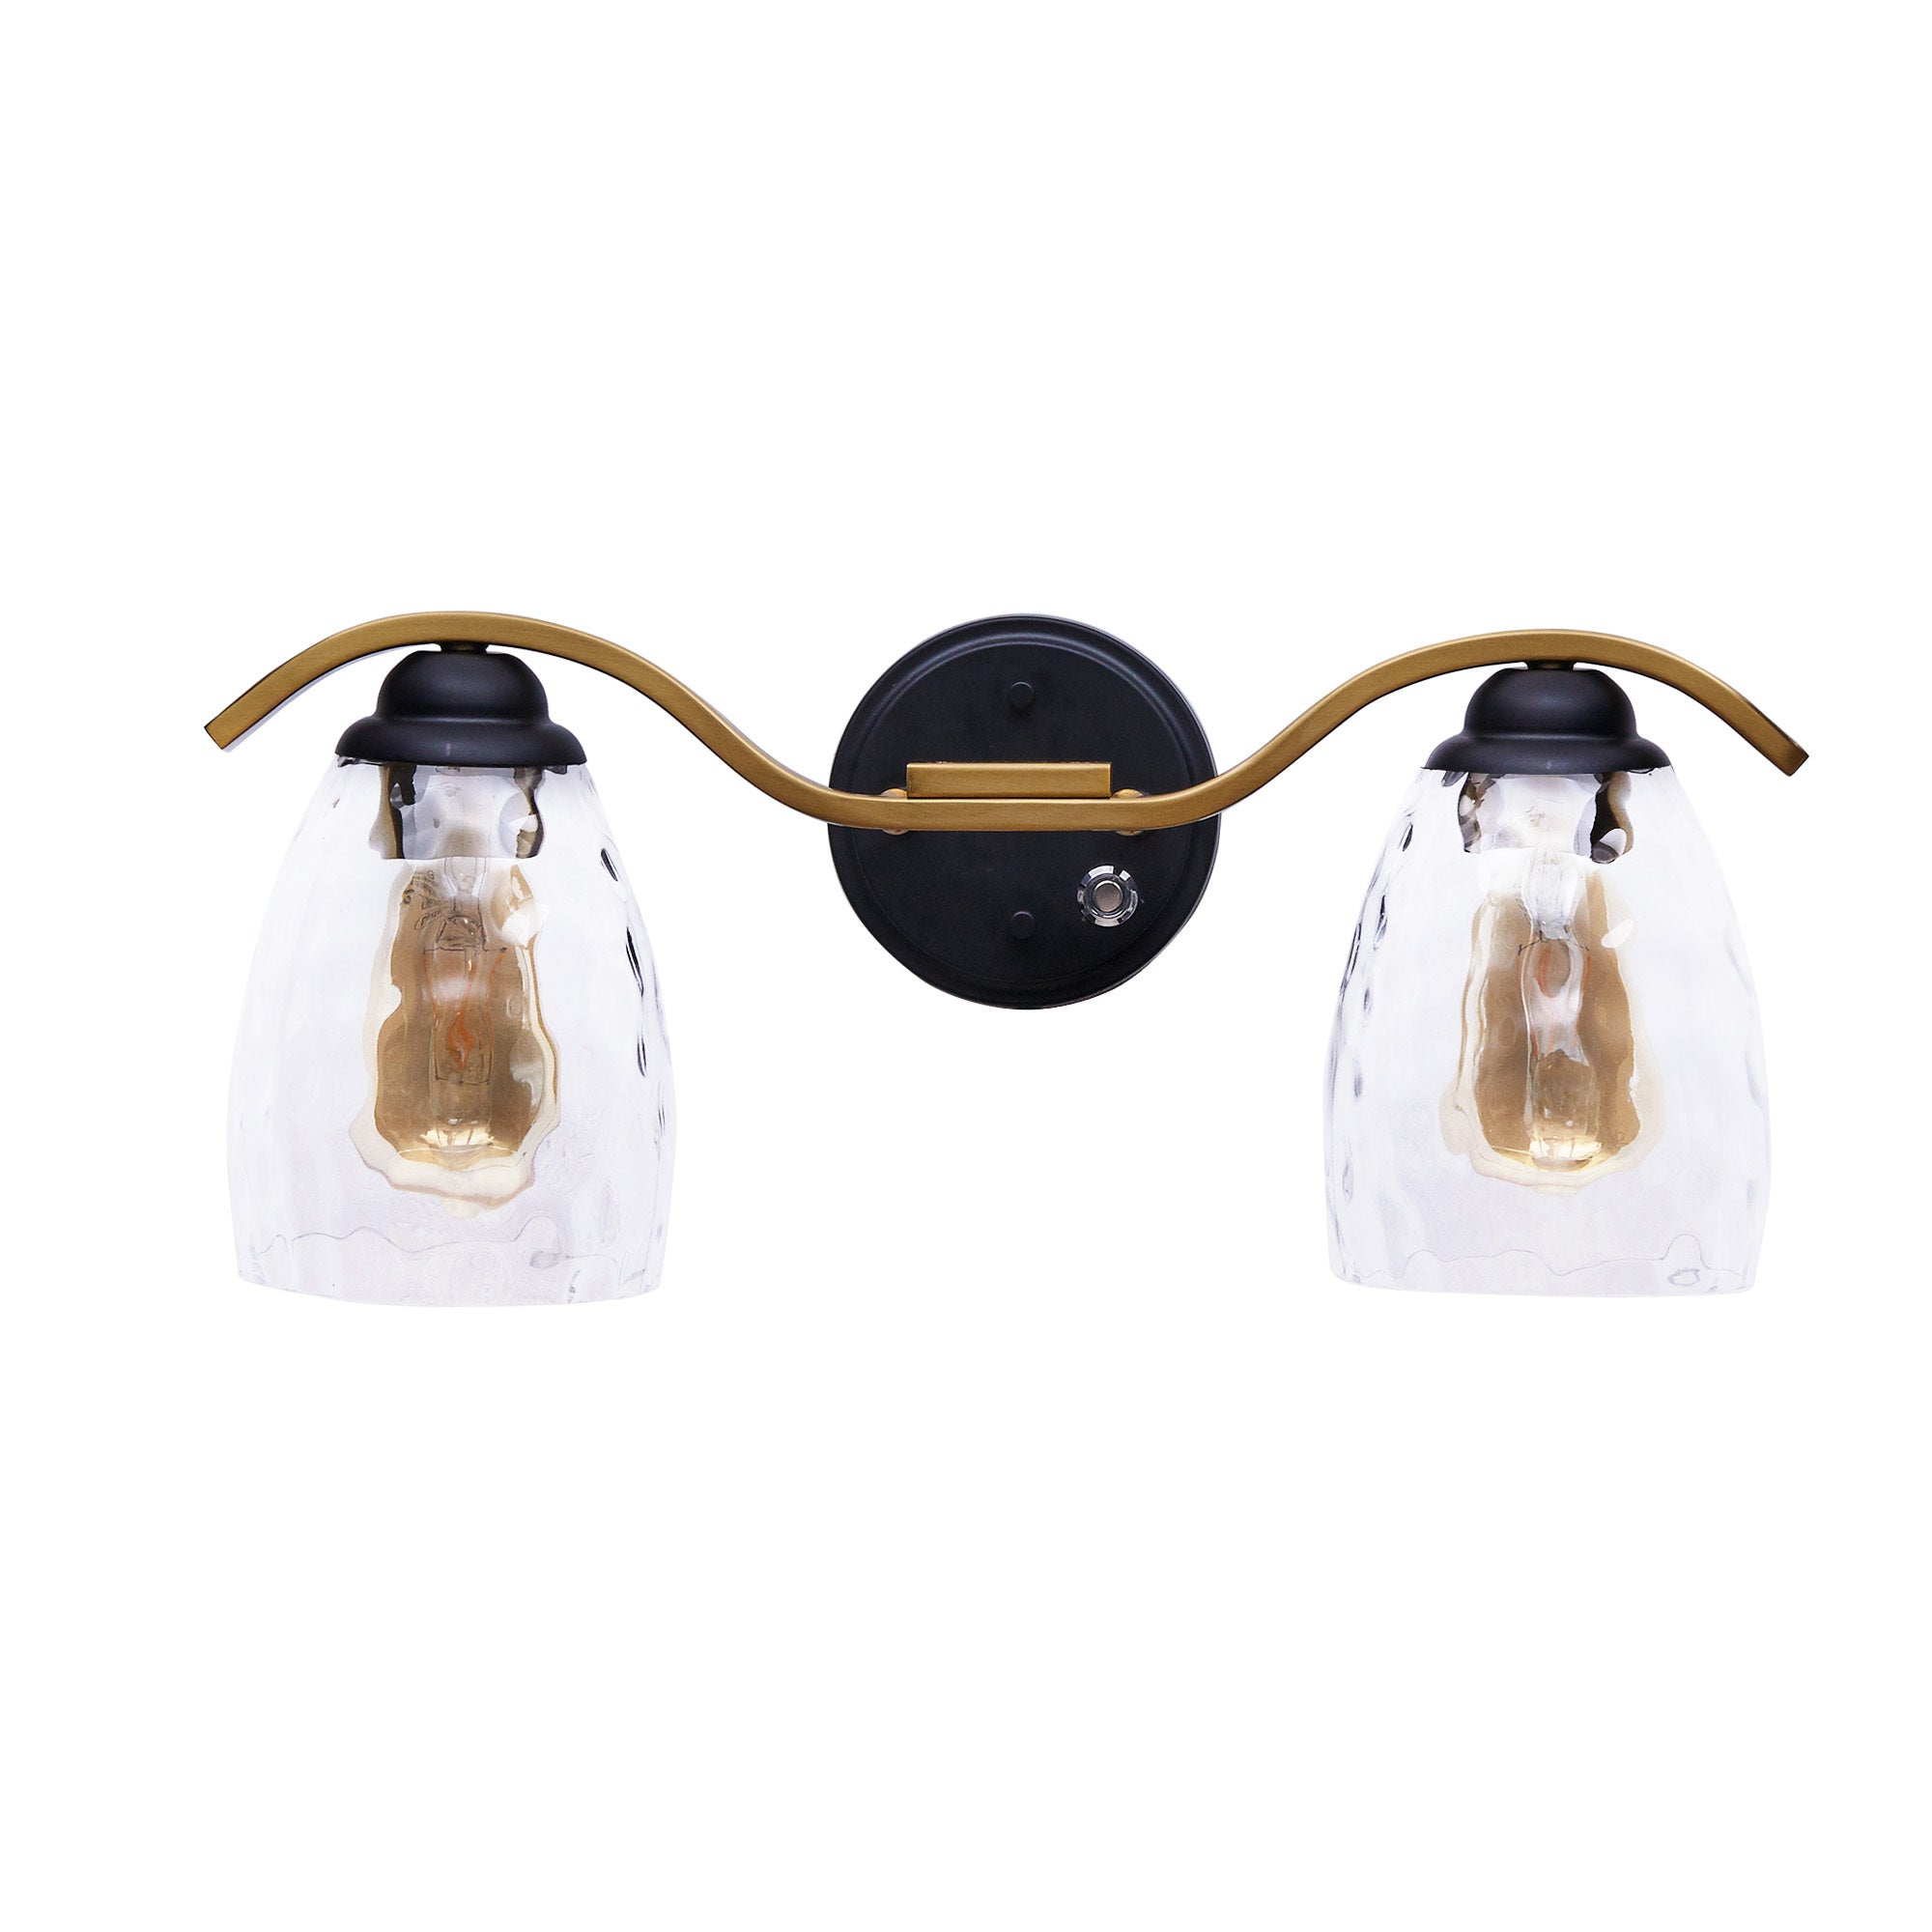 Heidi 2-Light Bathroom Vanity Wall Sconce Light with 3-Stage Touch Dimmer & Clear Hammered Glass Cloche Shades, Black/Brass